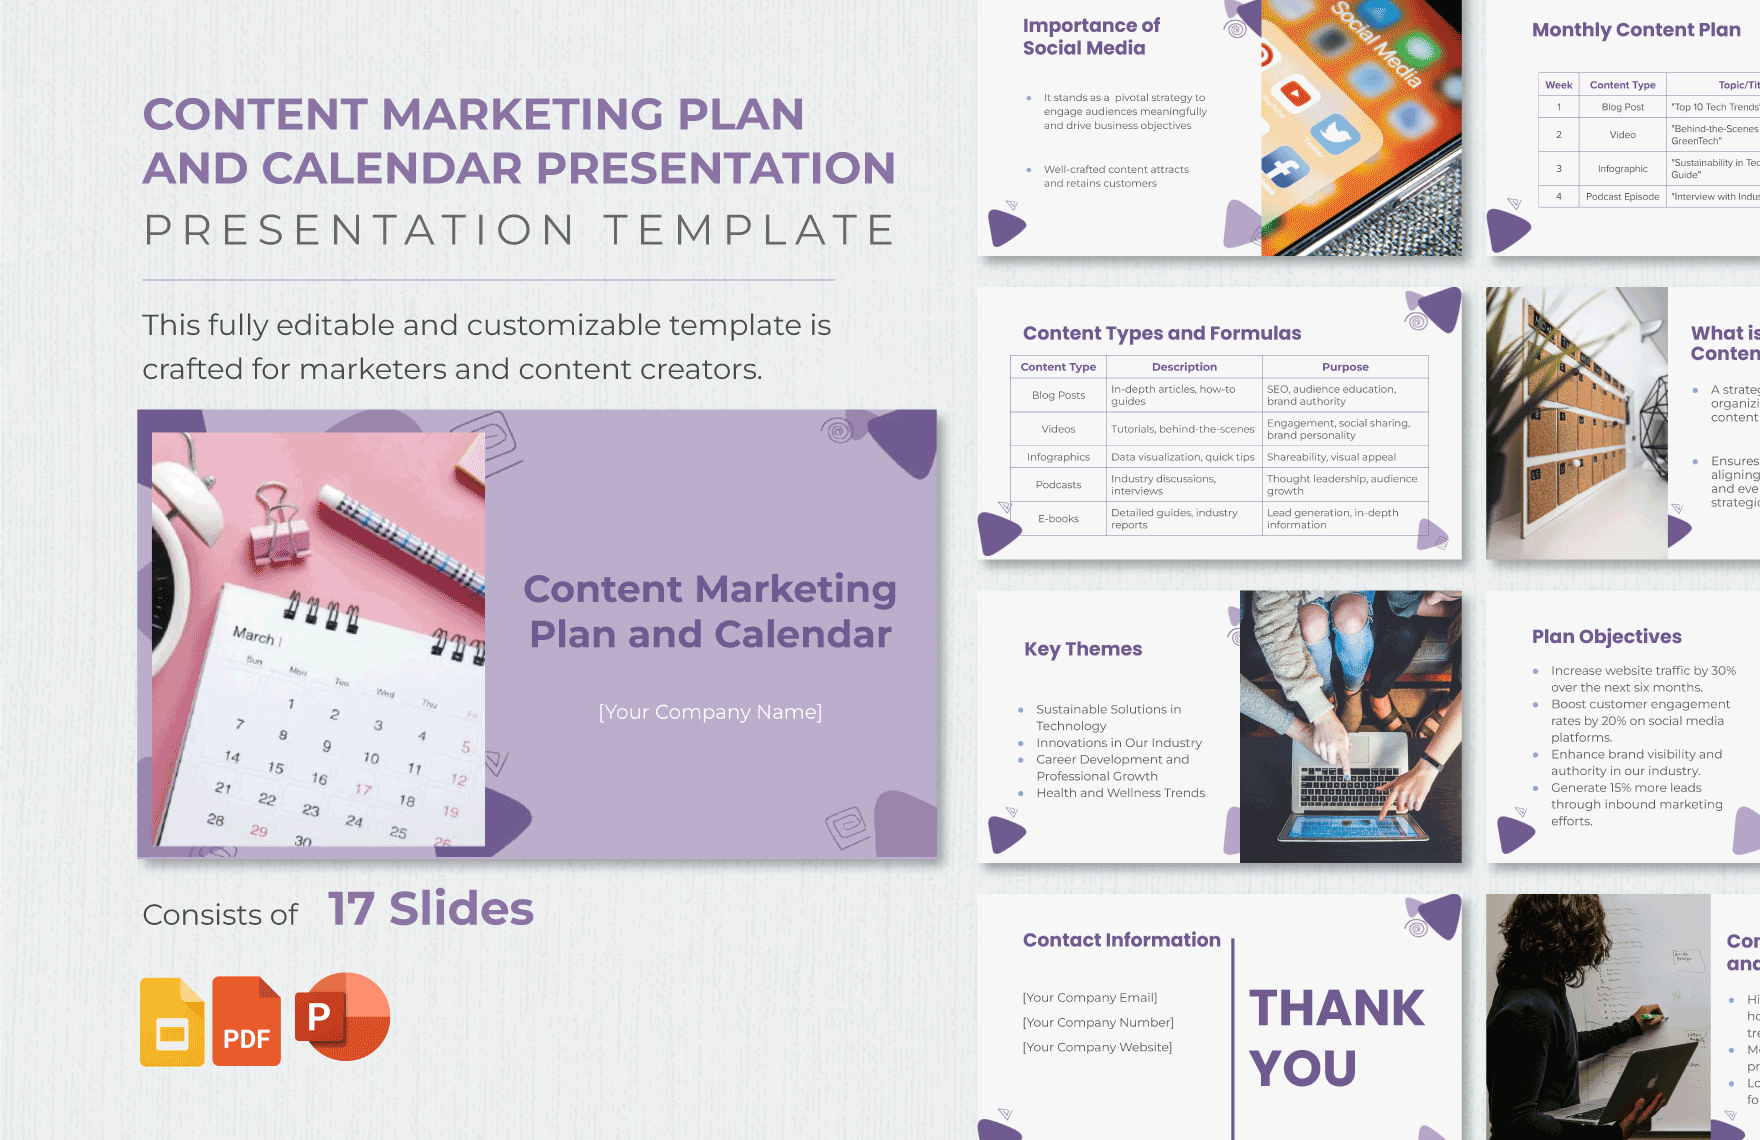 Content Marketing Plan and Calendar Presentation Template in PDF, PowerPoint, Google Slides